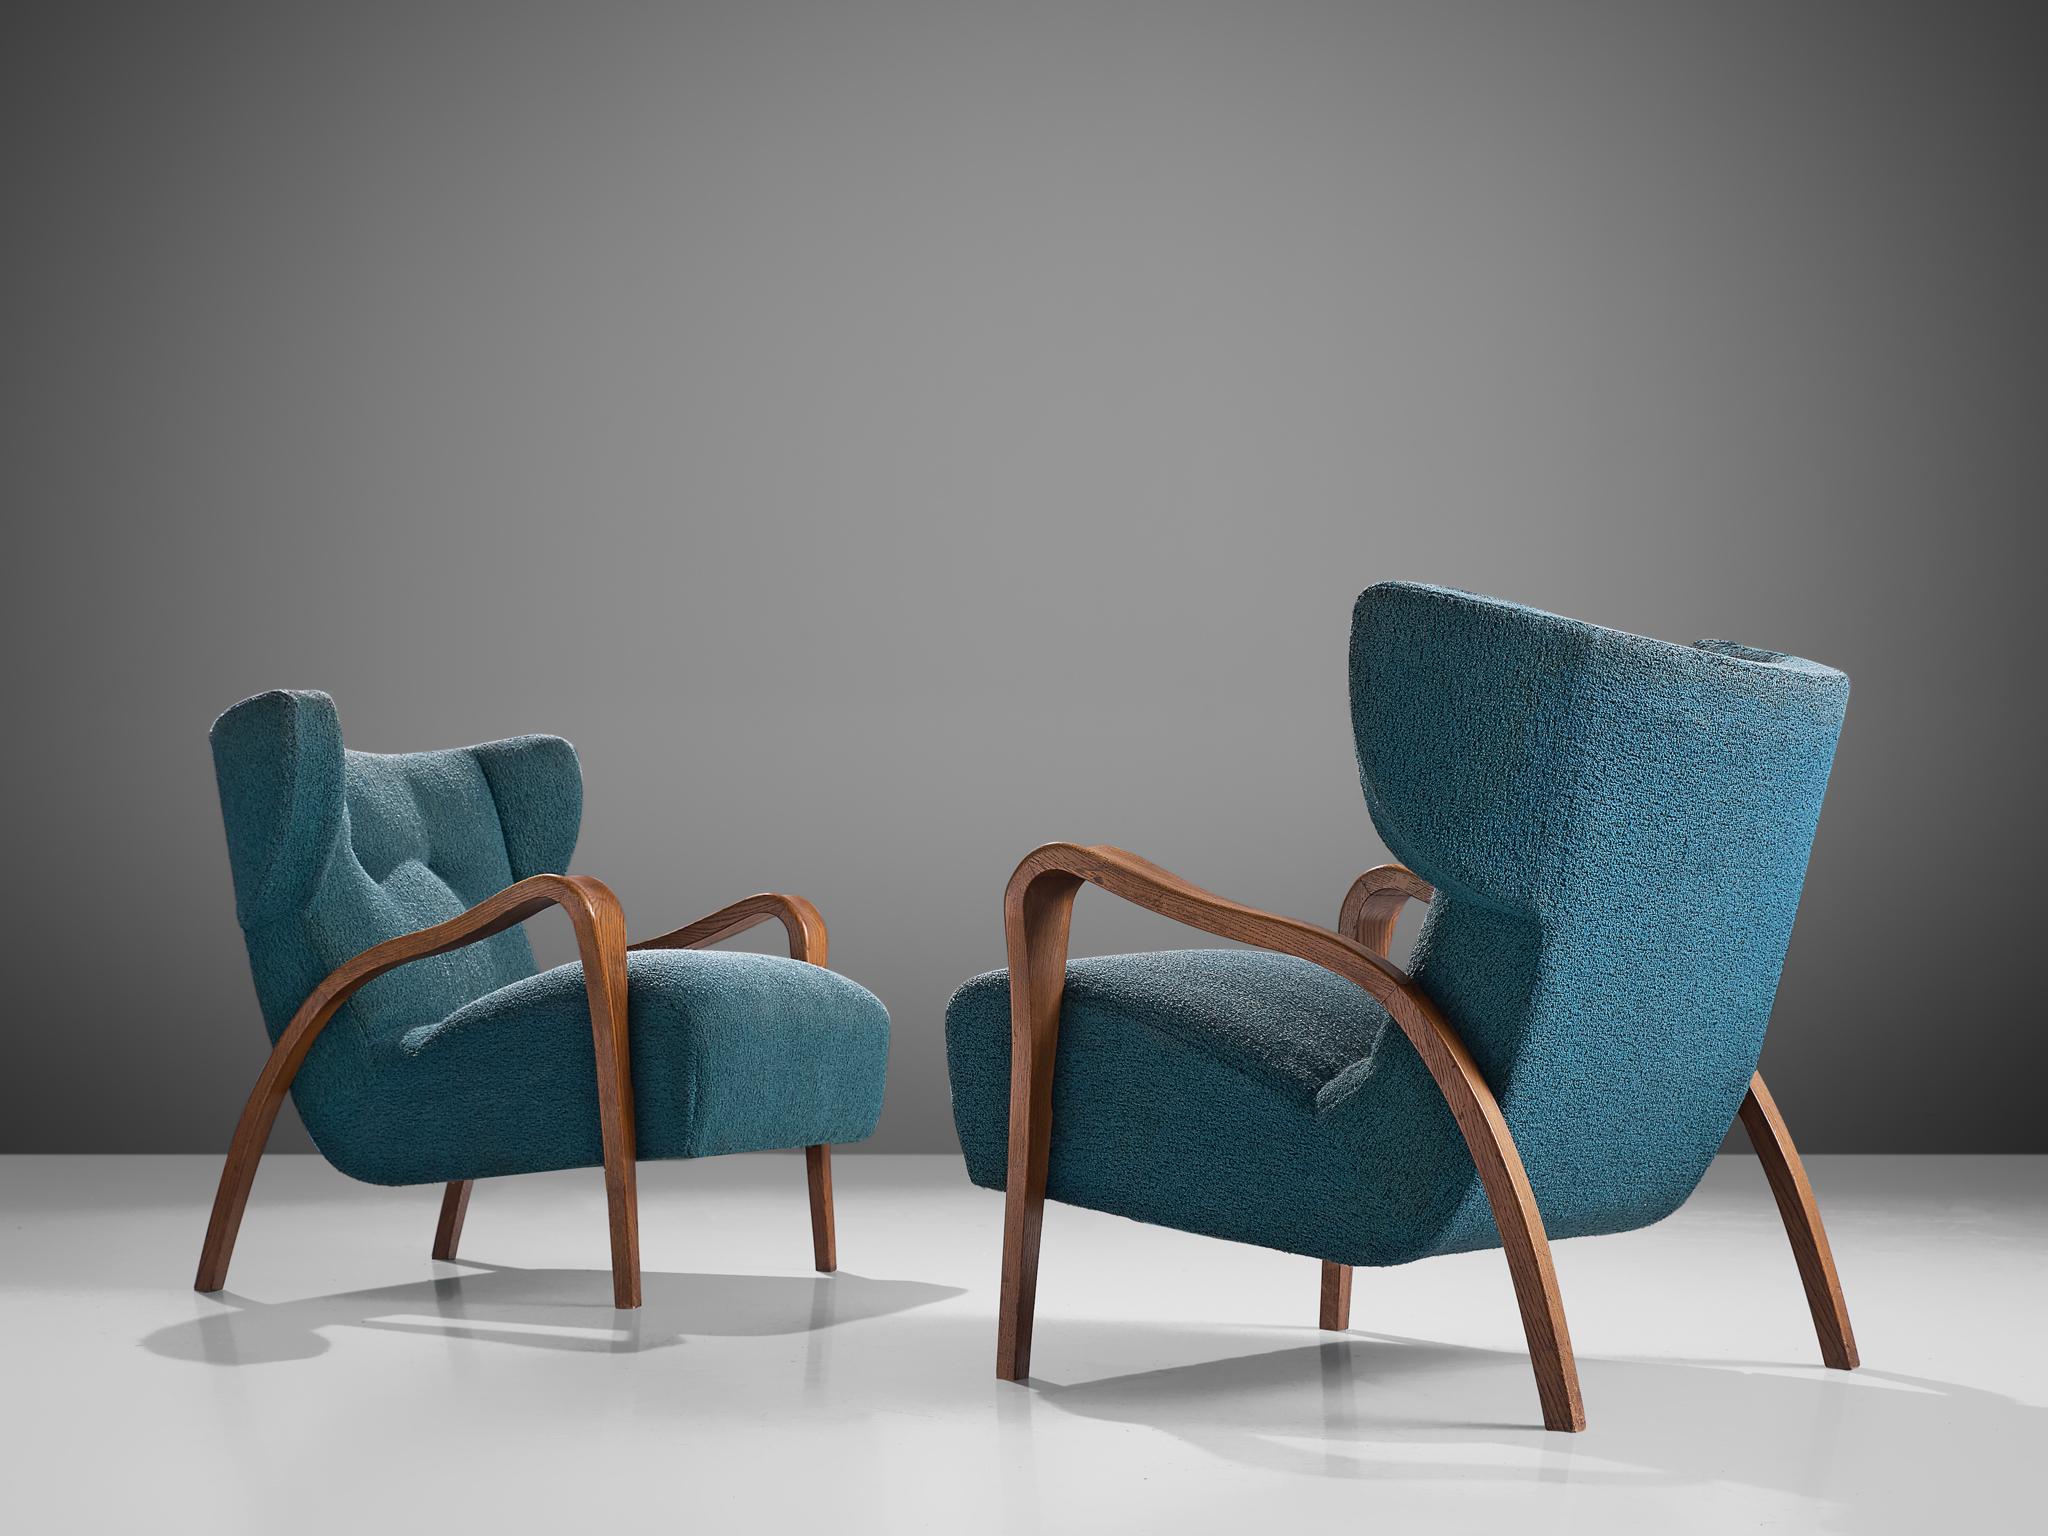 Pair of low wingback chairs to be reupholstered, oak and fabric, France, 1950s

Strudy and bulky set of French armchairs that features low wing backrests. The chairs are from late Art Deco period, as they show its distinctive characteristics, such